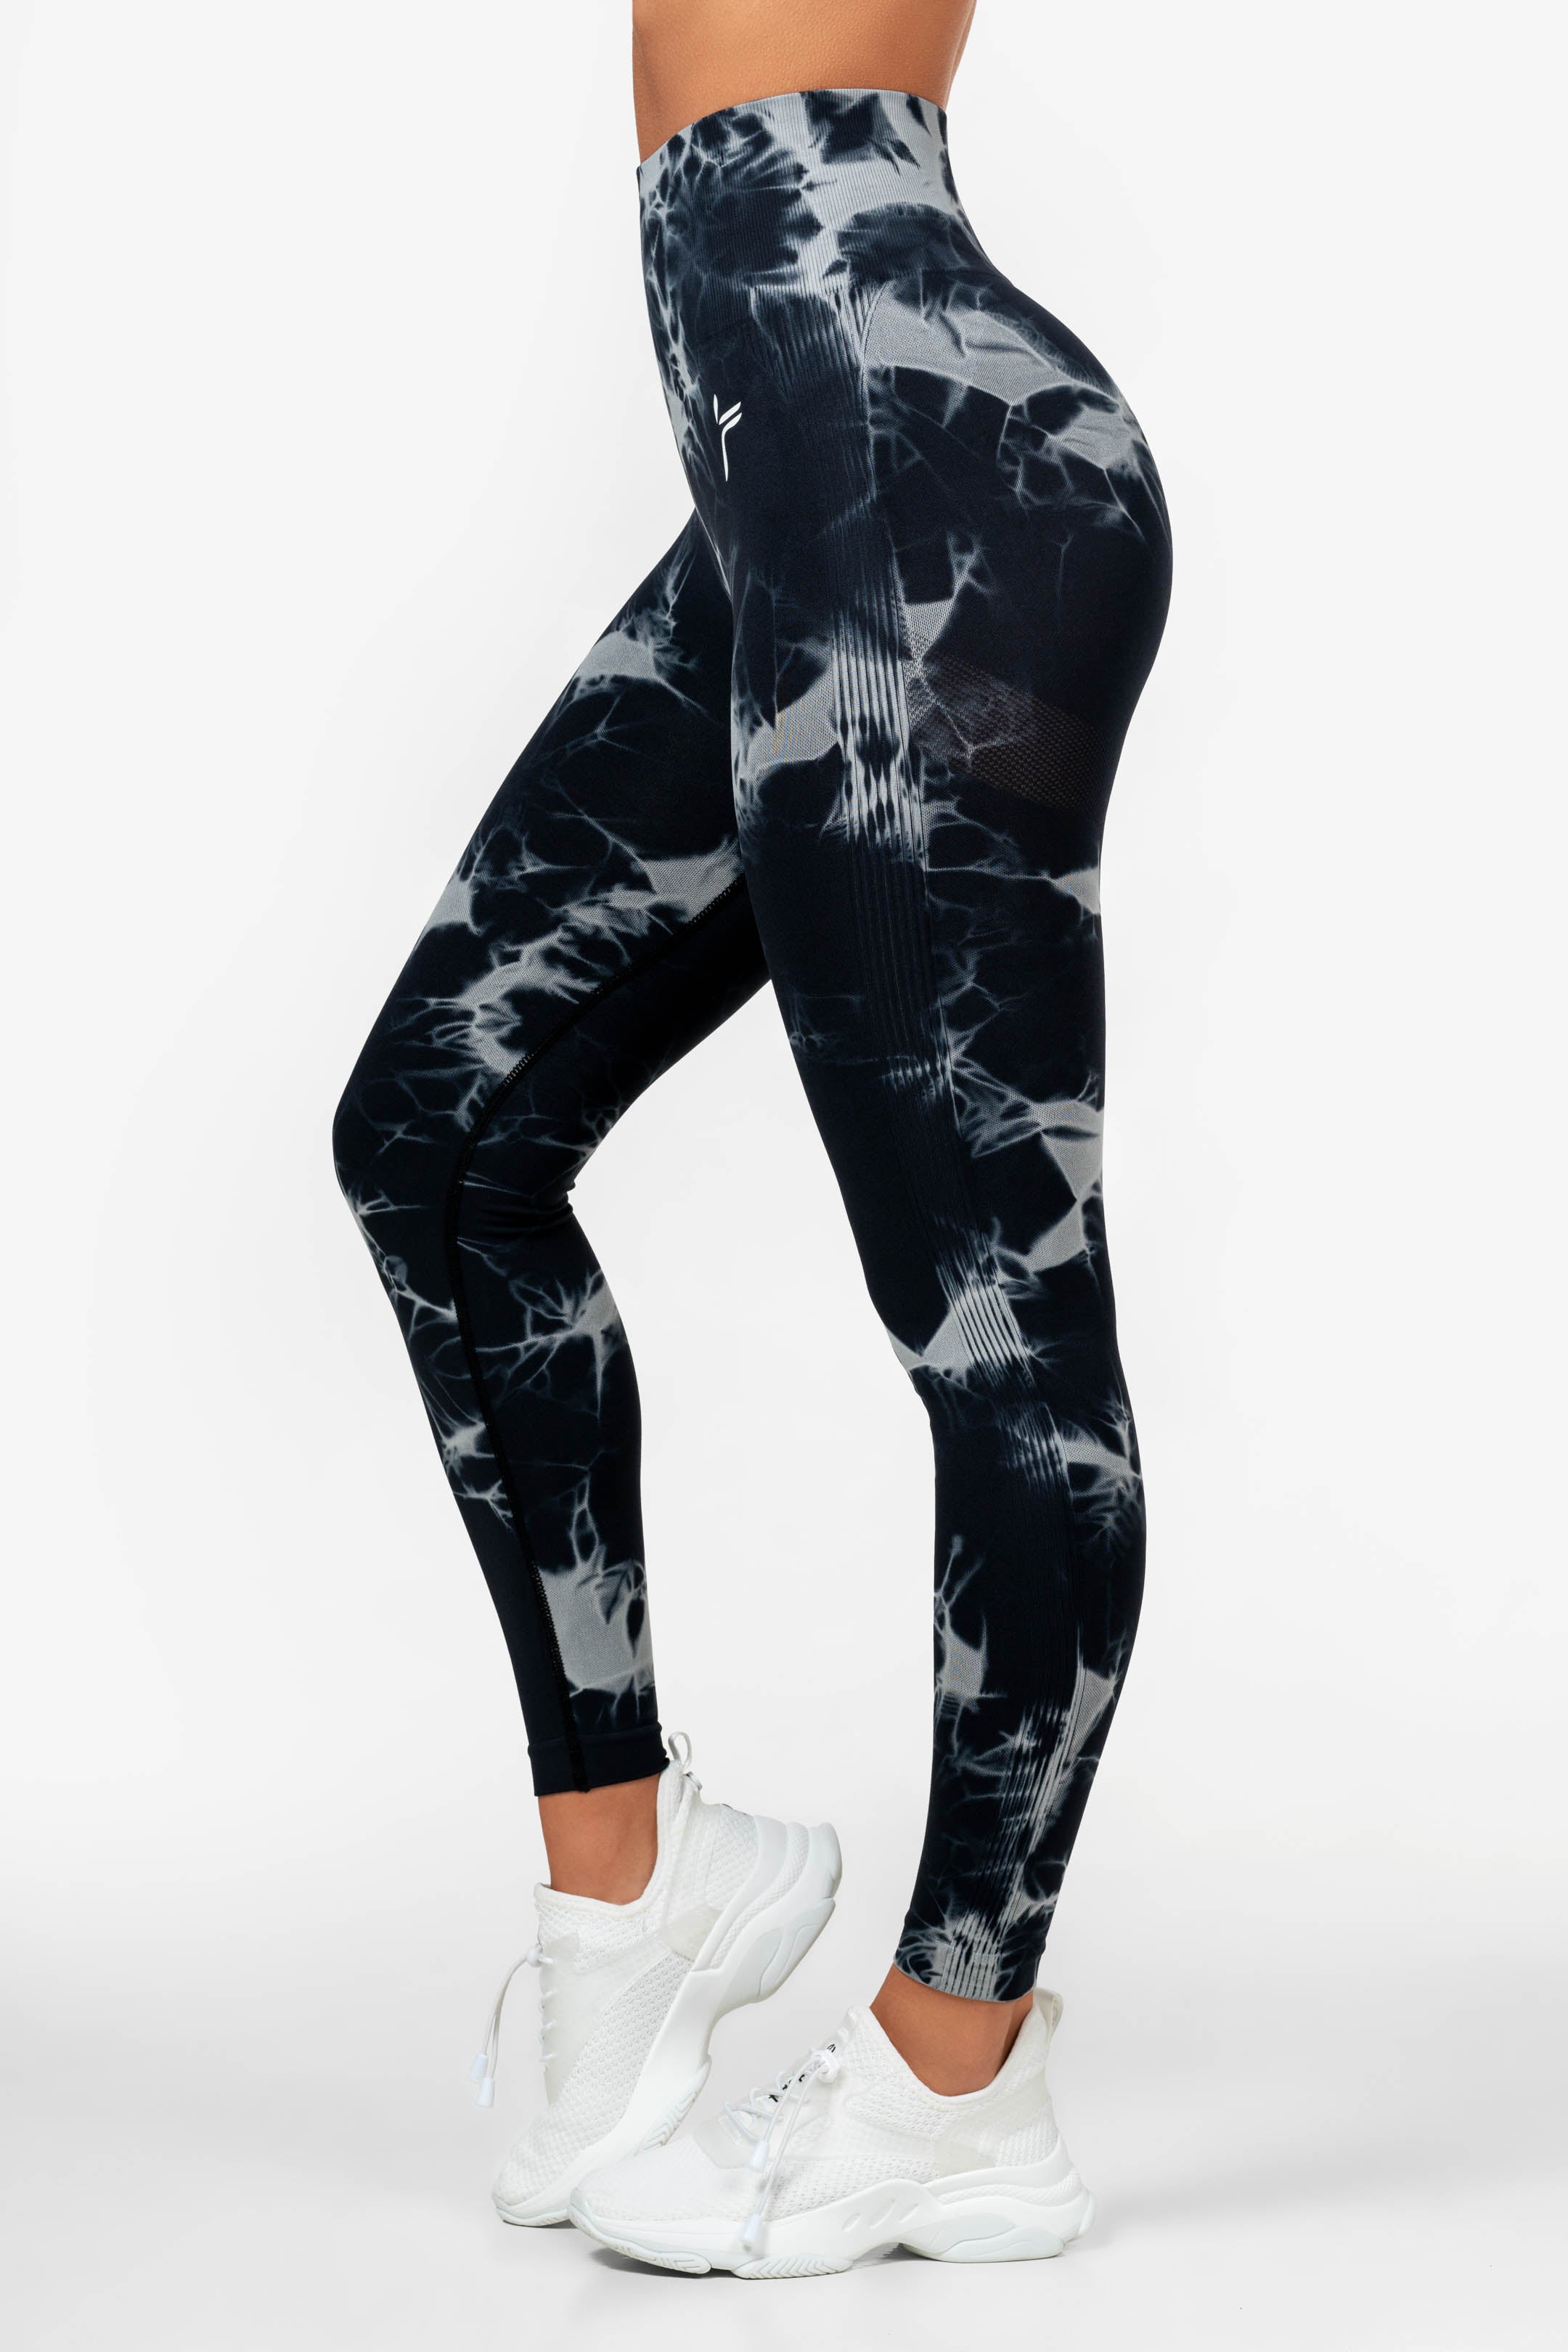 TIE DYE Scrunch Bum Leggings Women Seamless Marble Workout Wear Yoga Pants  Ruched Booty Tights Sports Fitness Outfits Gym Legins